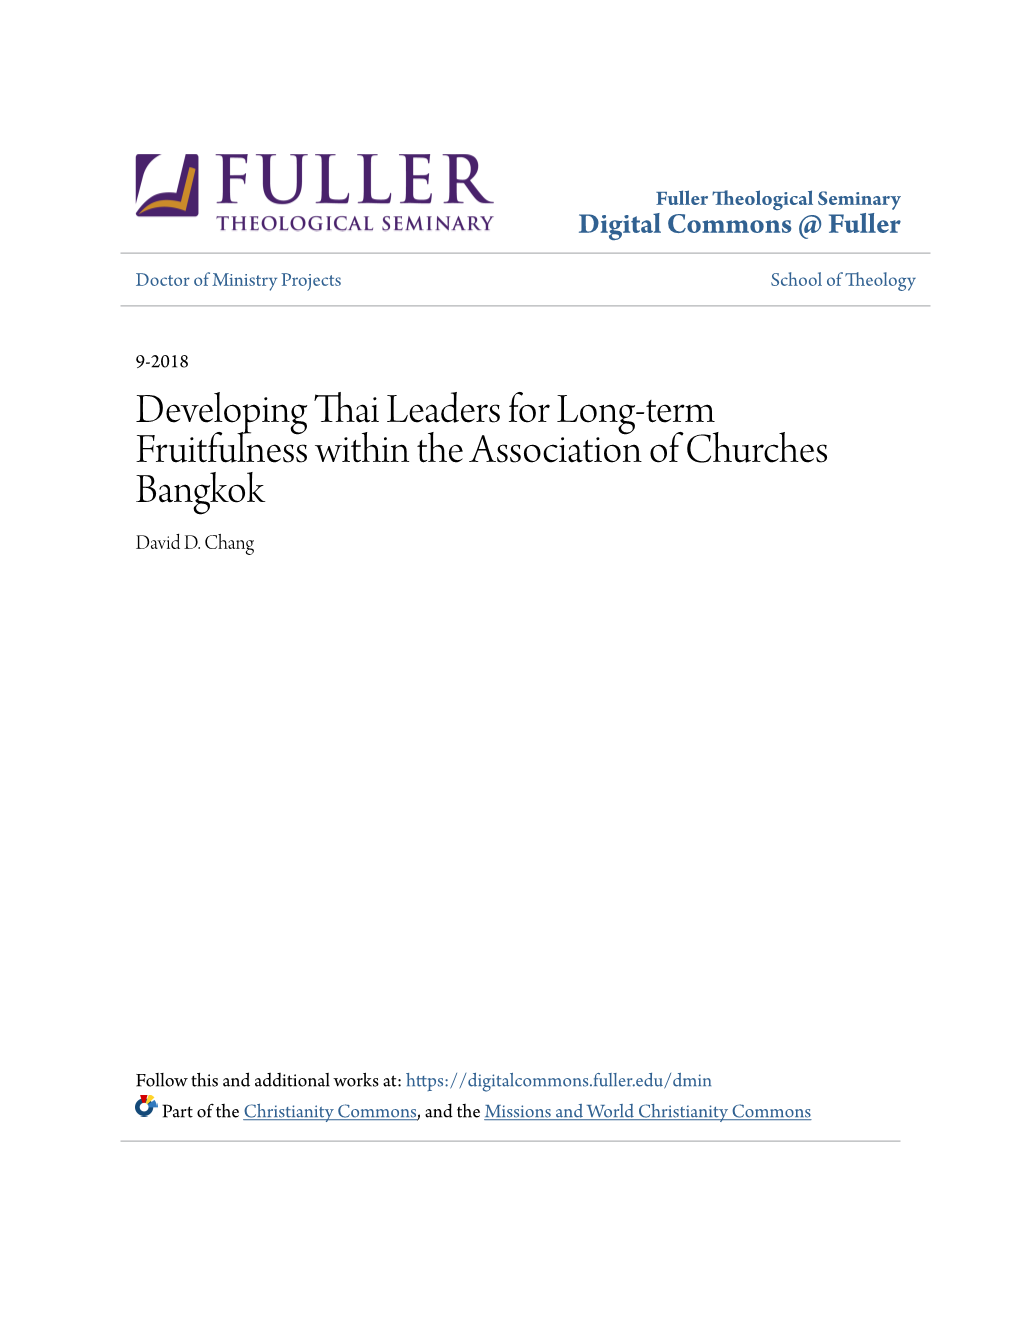 Developing Thai Leaders for Long-Term Fruitfulness Within the Association of Churches Bangkok David D